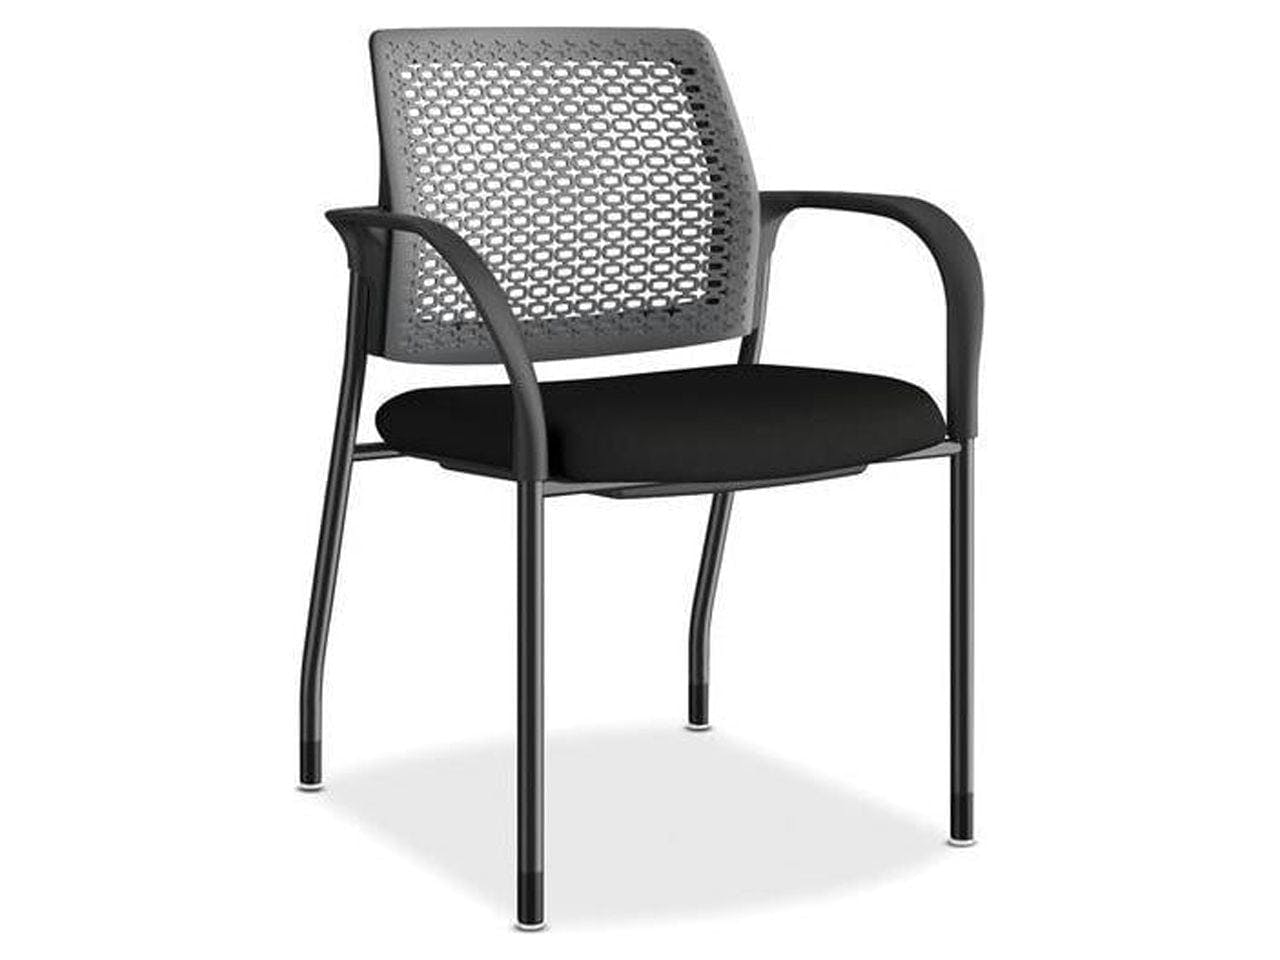 Contour Comfort Black Fabric and Steel Stacking Chair